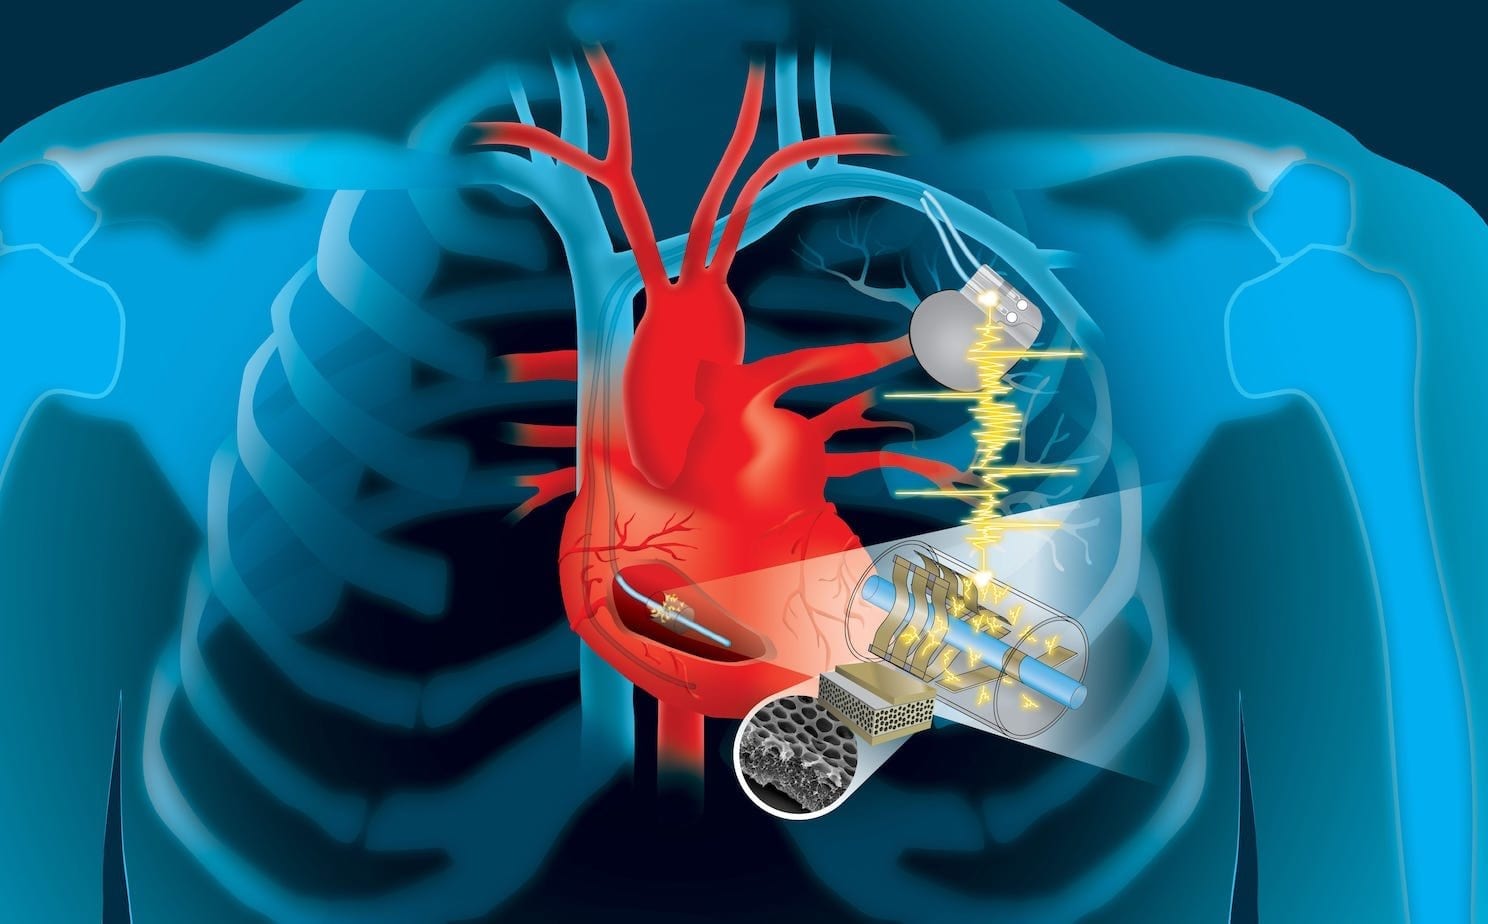 Harvesting the  heart’s energy to power life-saving devices